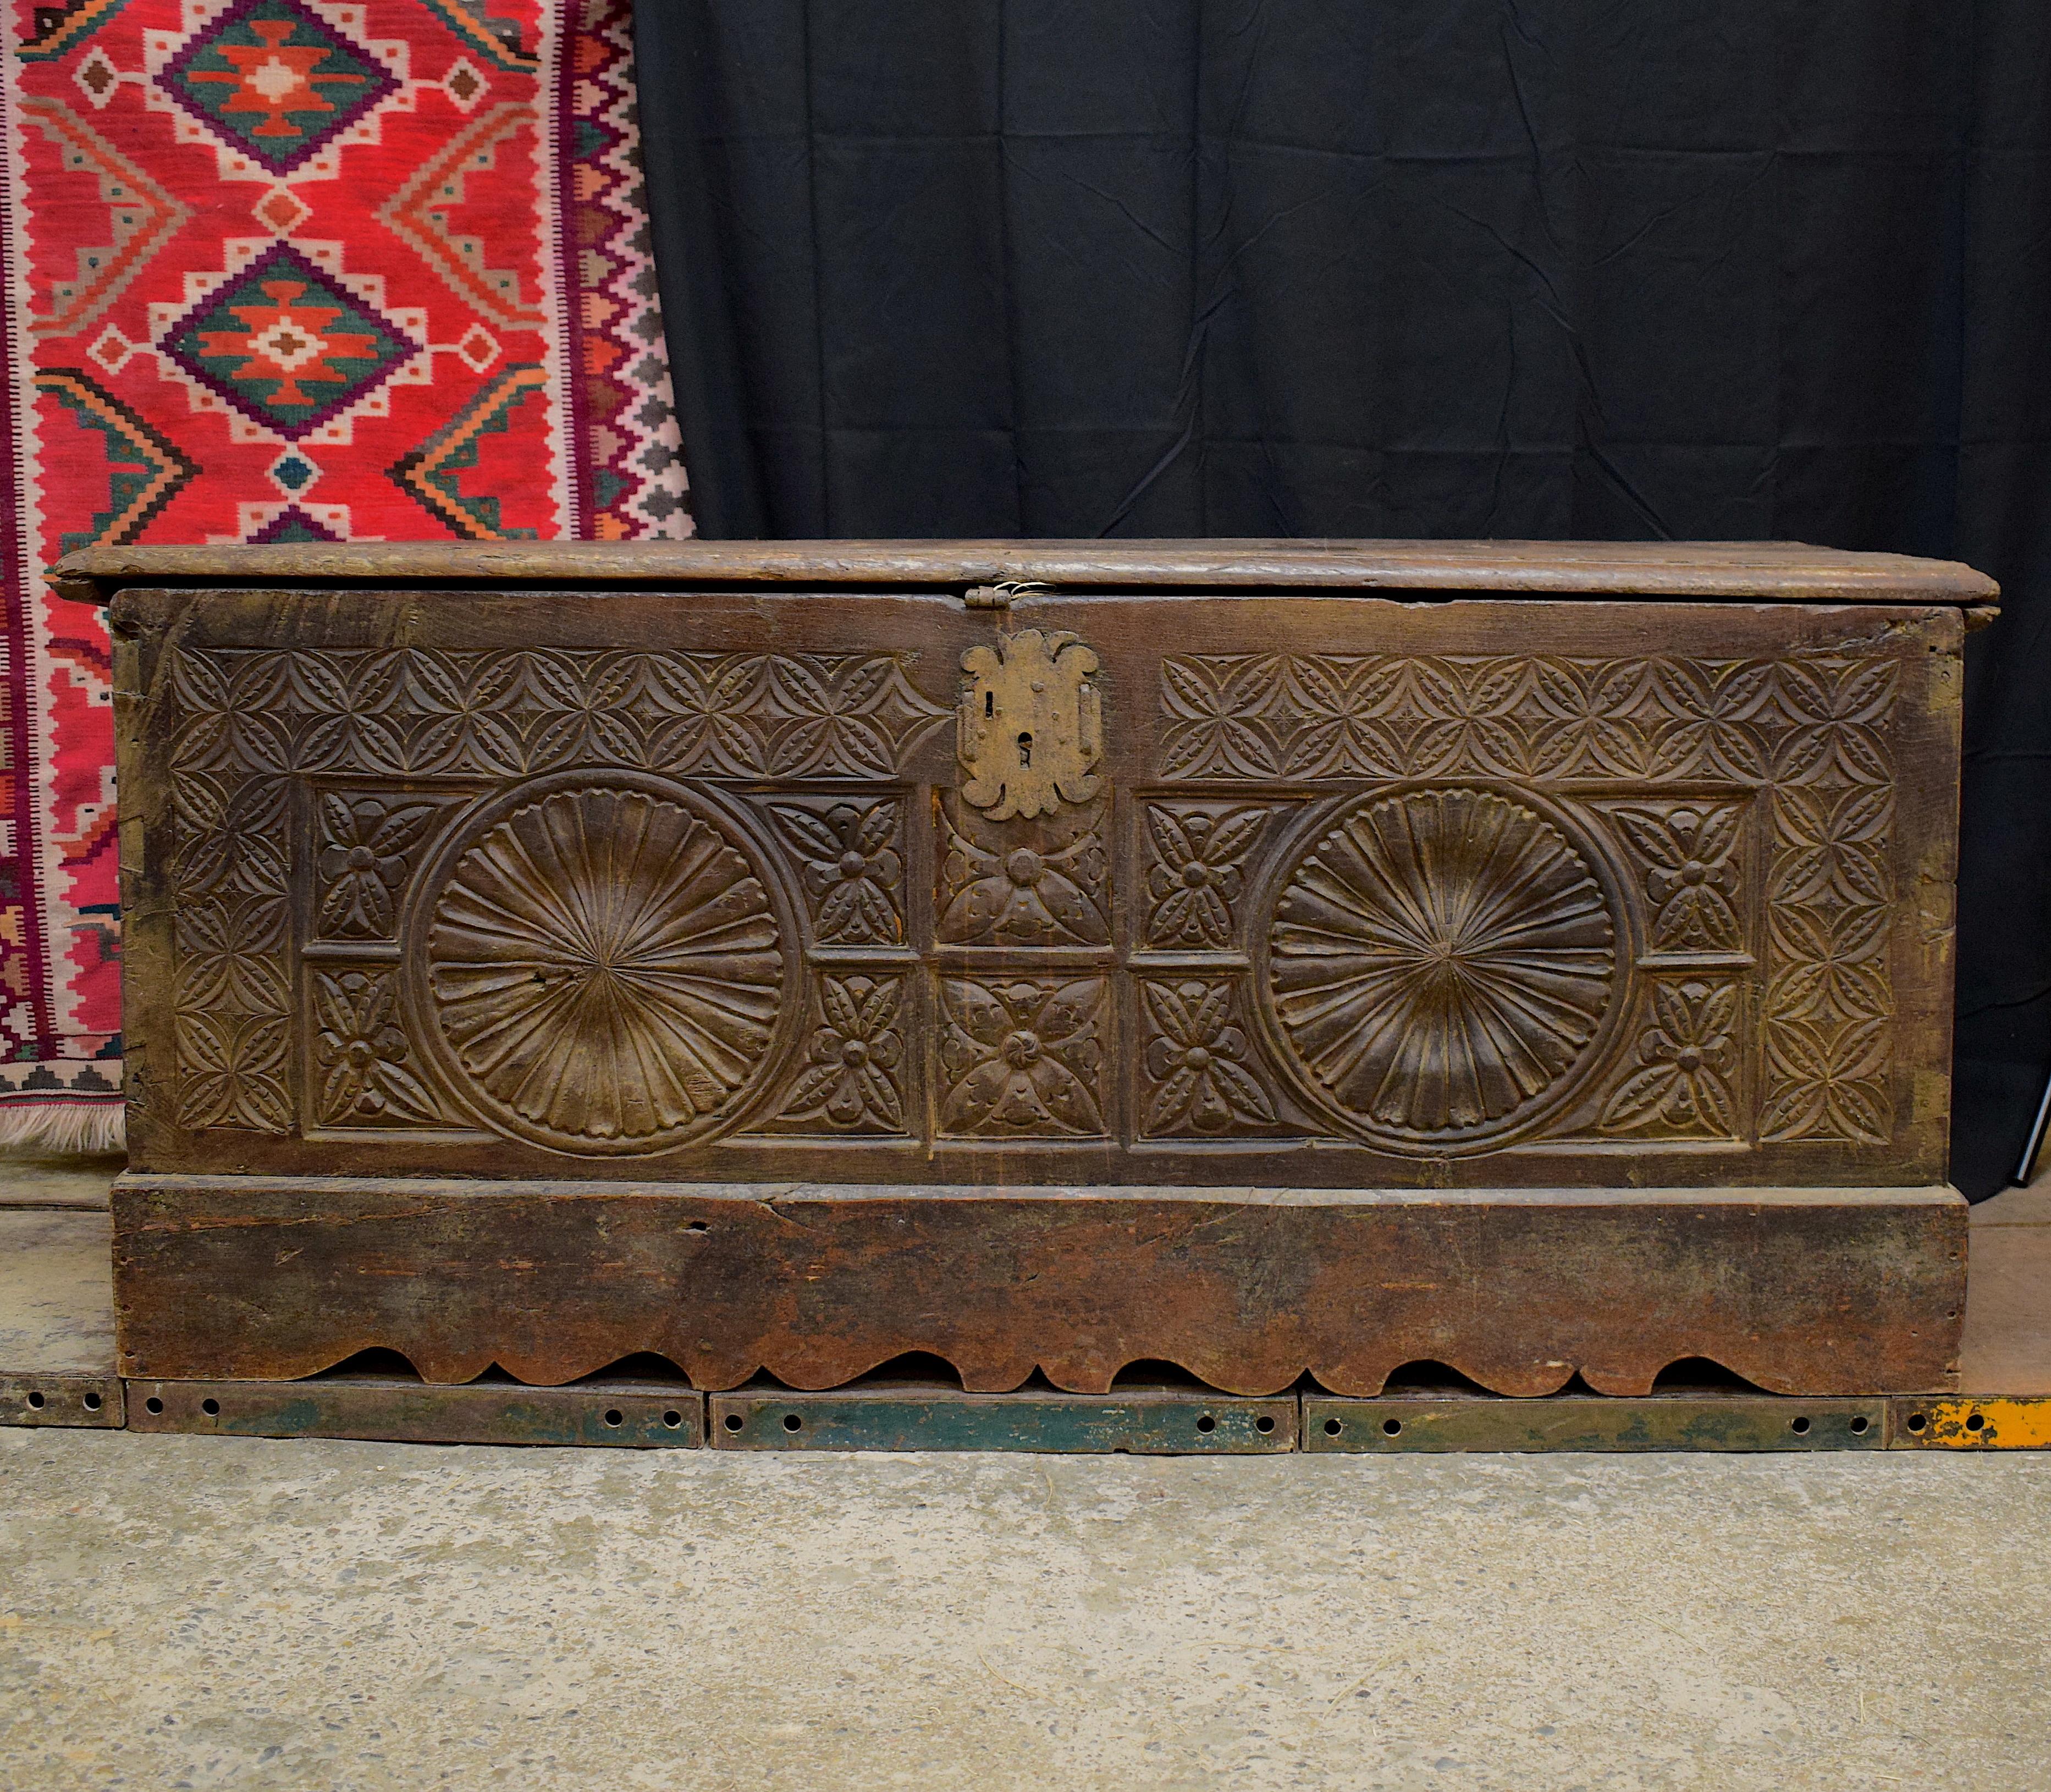 A French 17th century large carved oak trunk. This trunk features a long rectangular shape body whereby the front panel has carved into it a Gothic style ornamentation in the form of a geometrical design. The top, sides and back have no carved